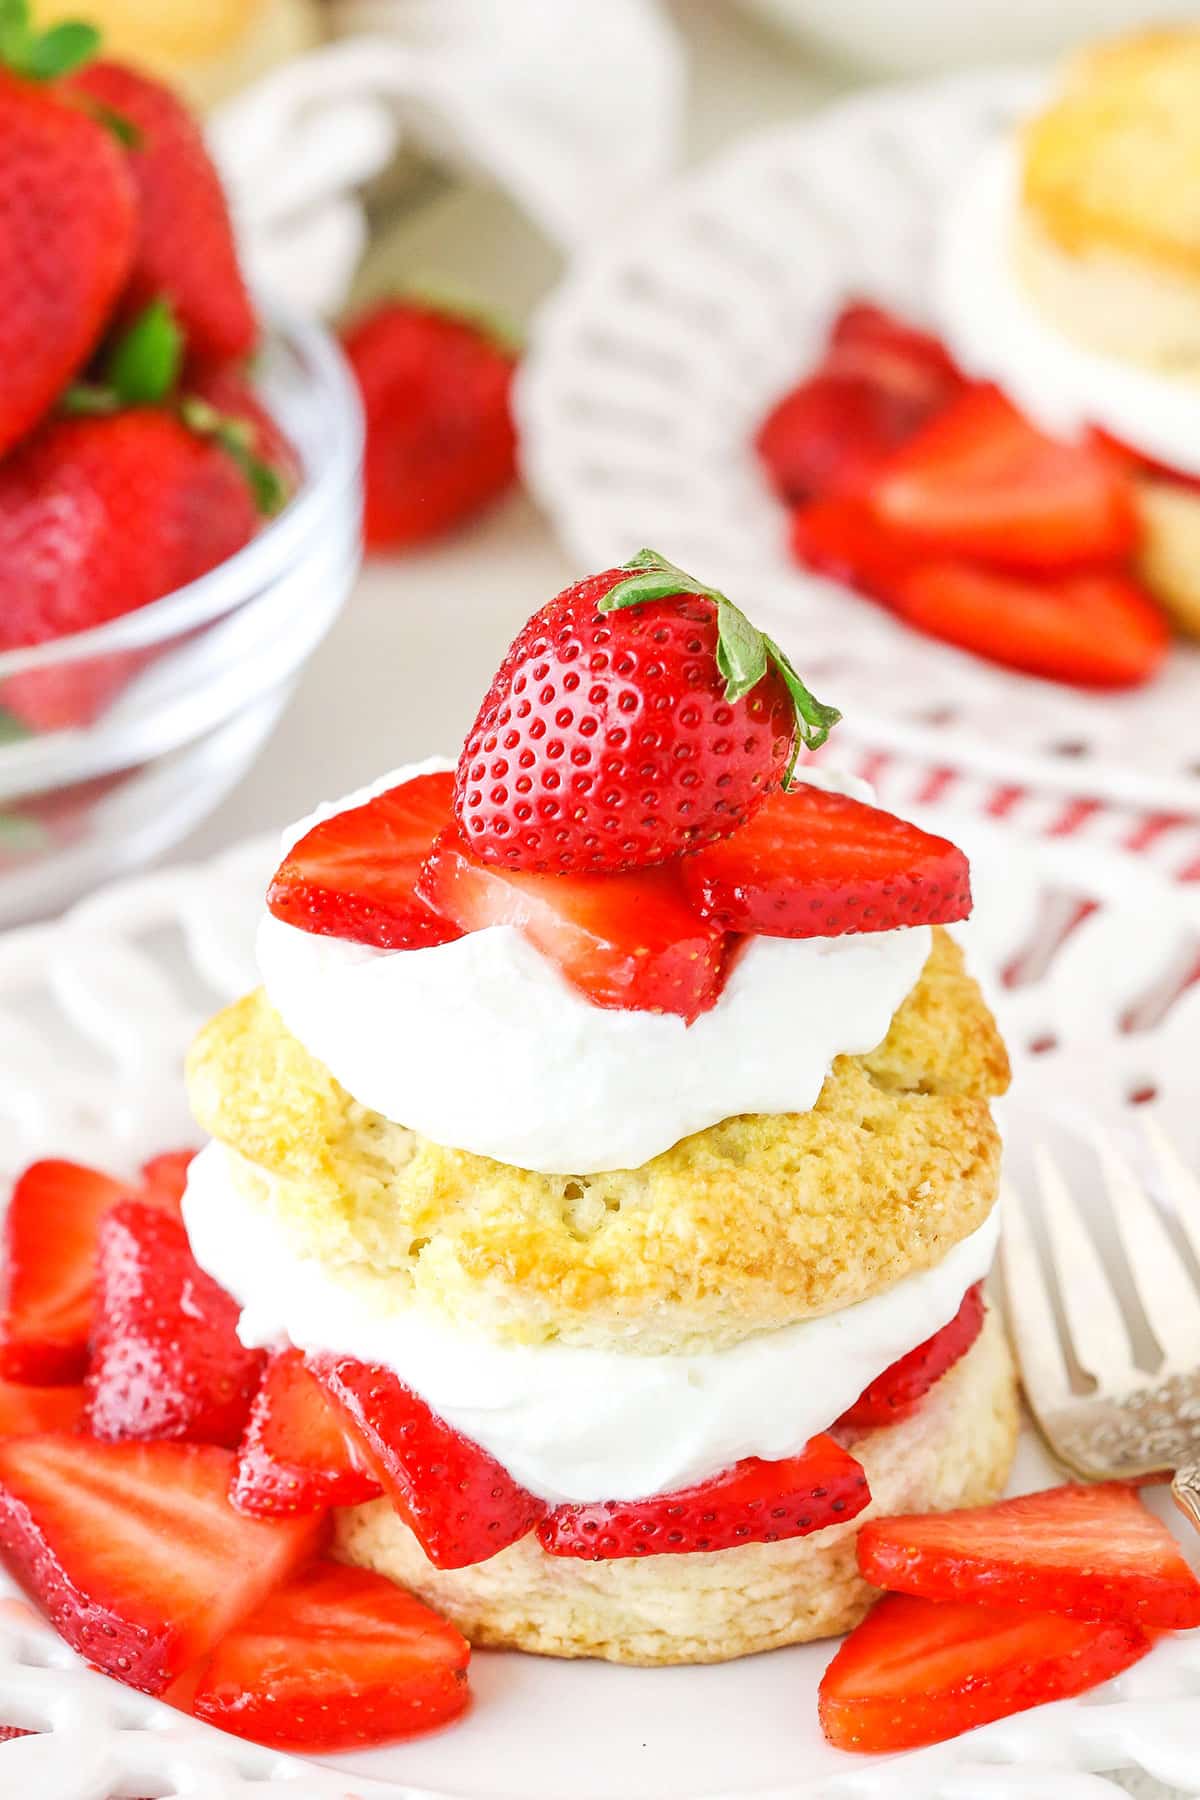 Strawberry shortcake on a plate with homemade whipped cream.